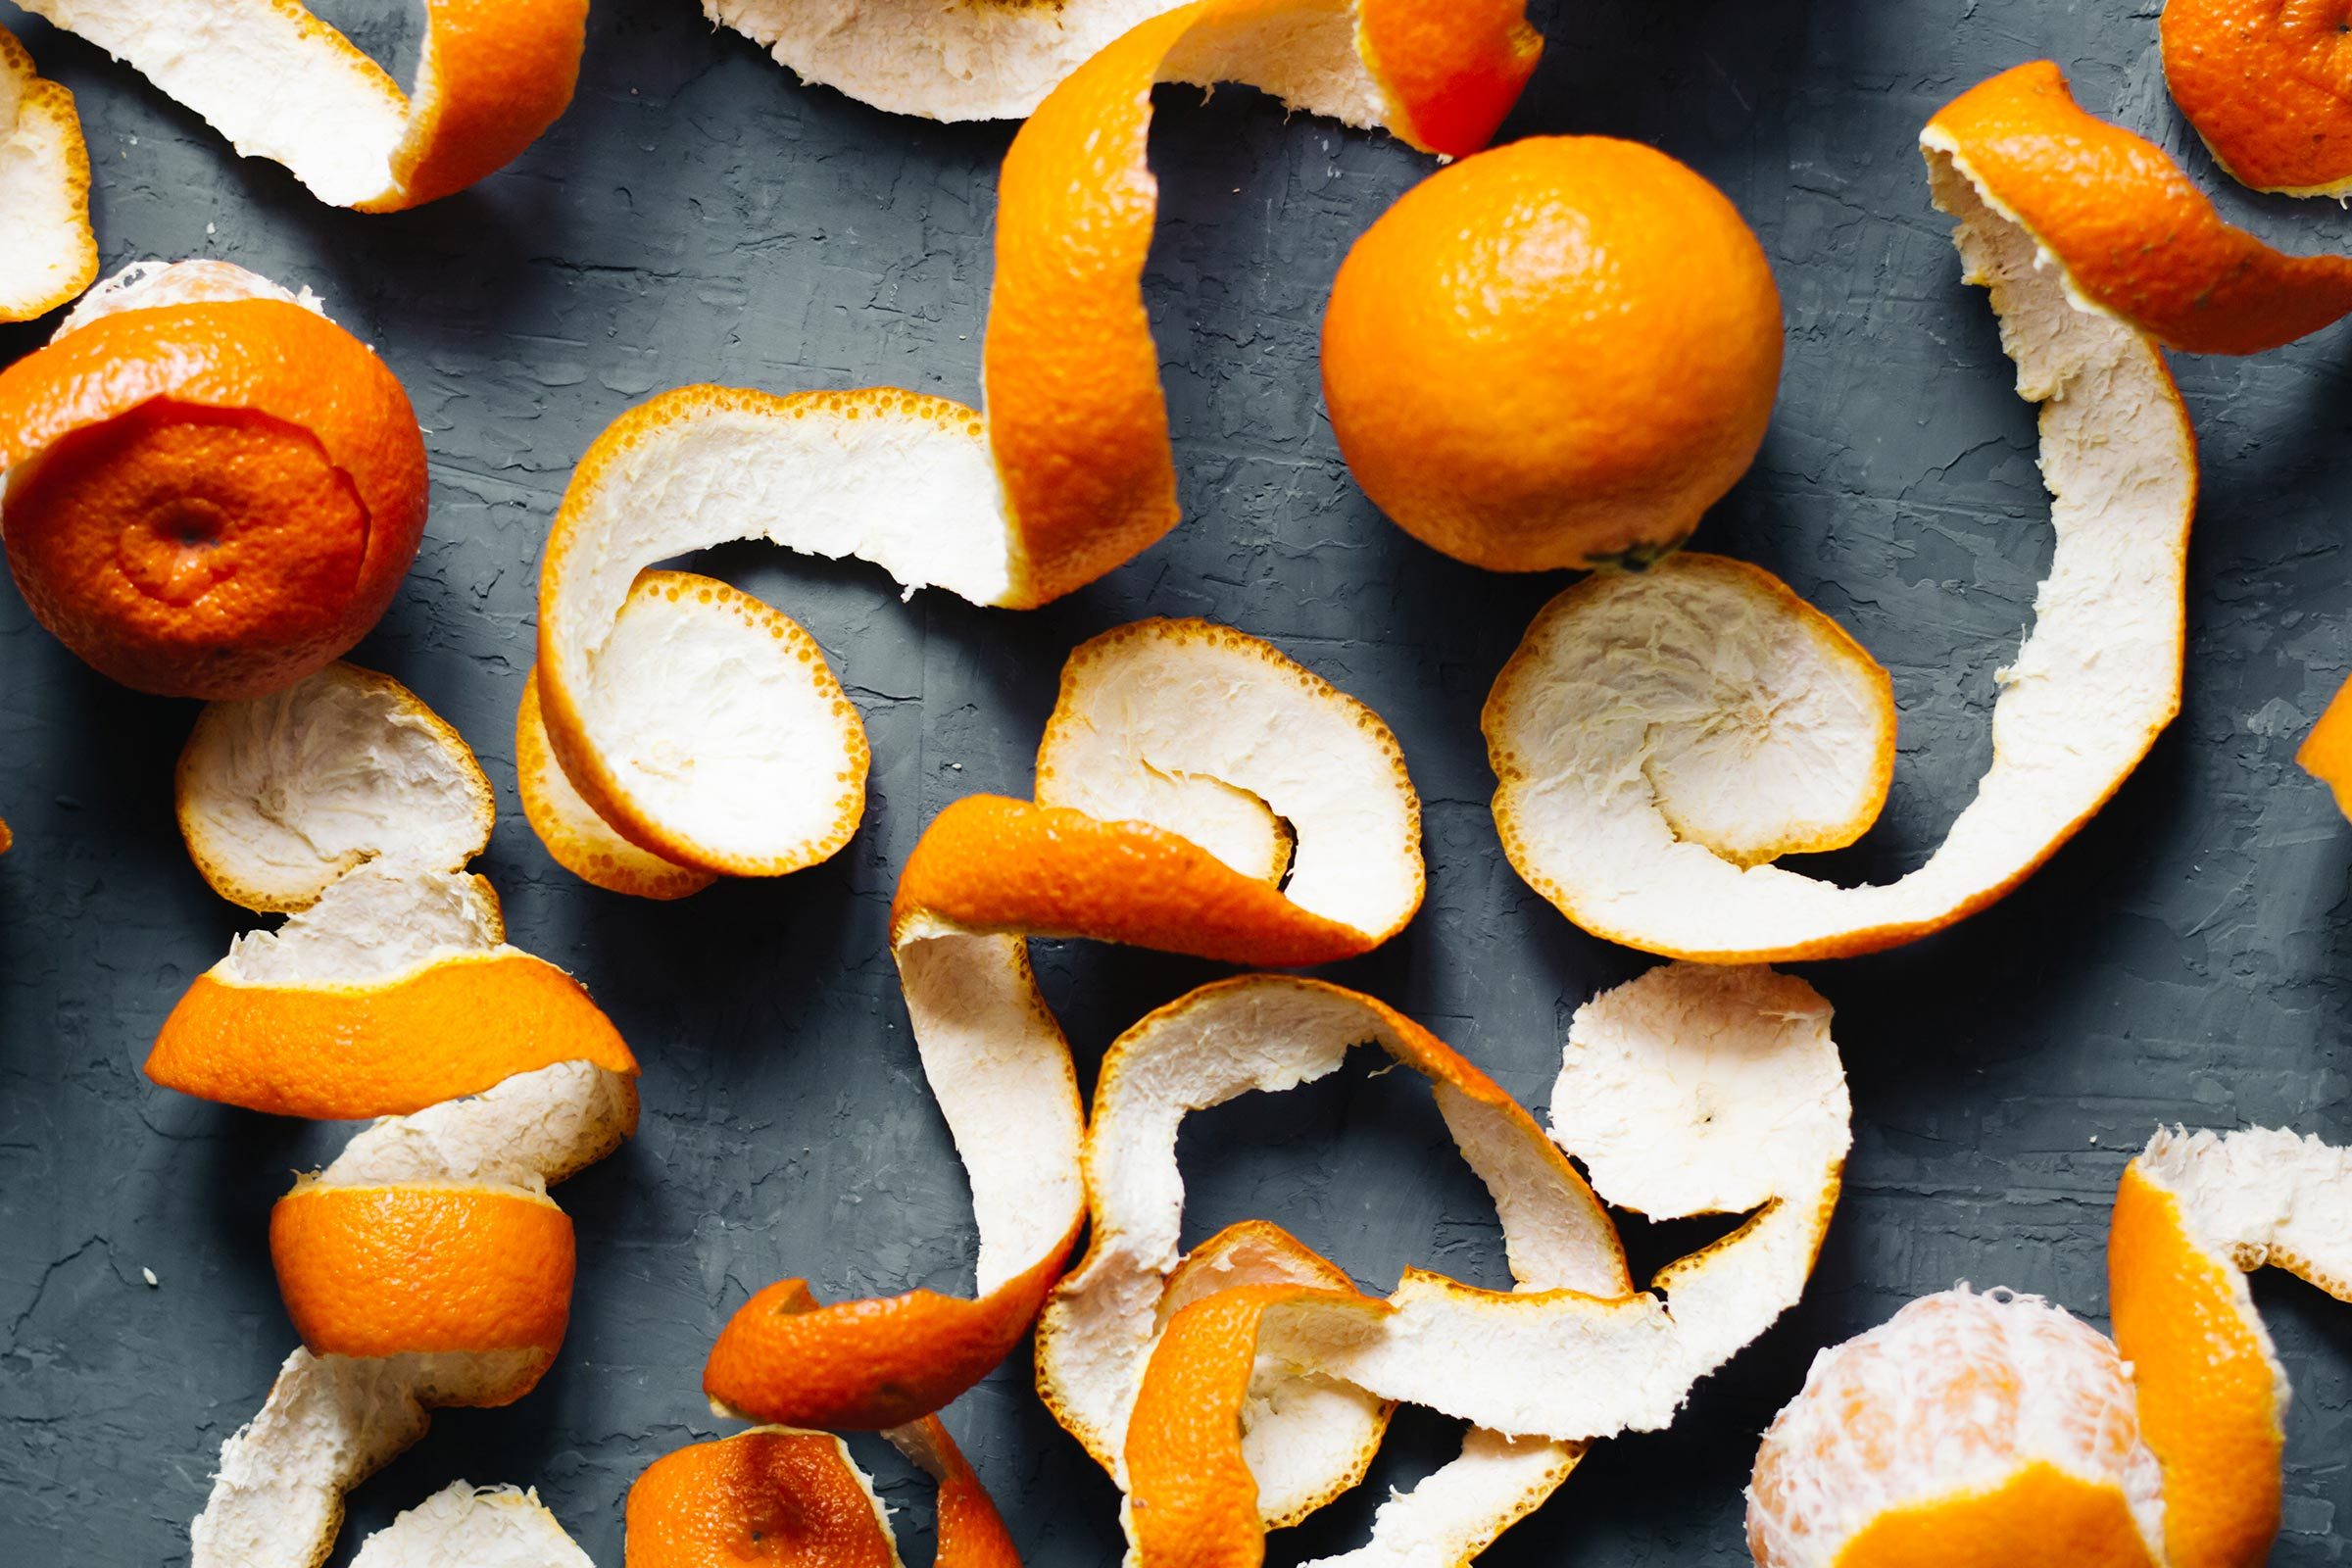 What To Do With Old Oranges: 16 Great Household Hacks For Oranges